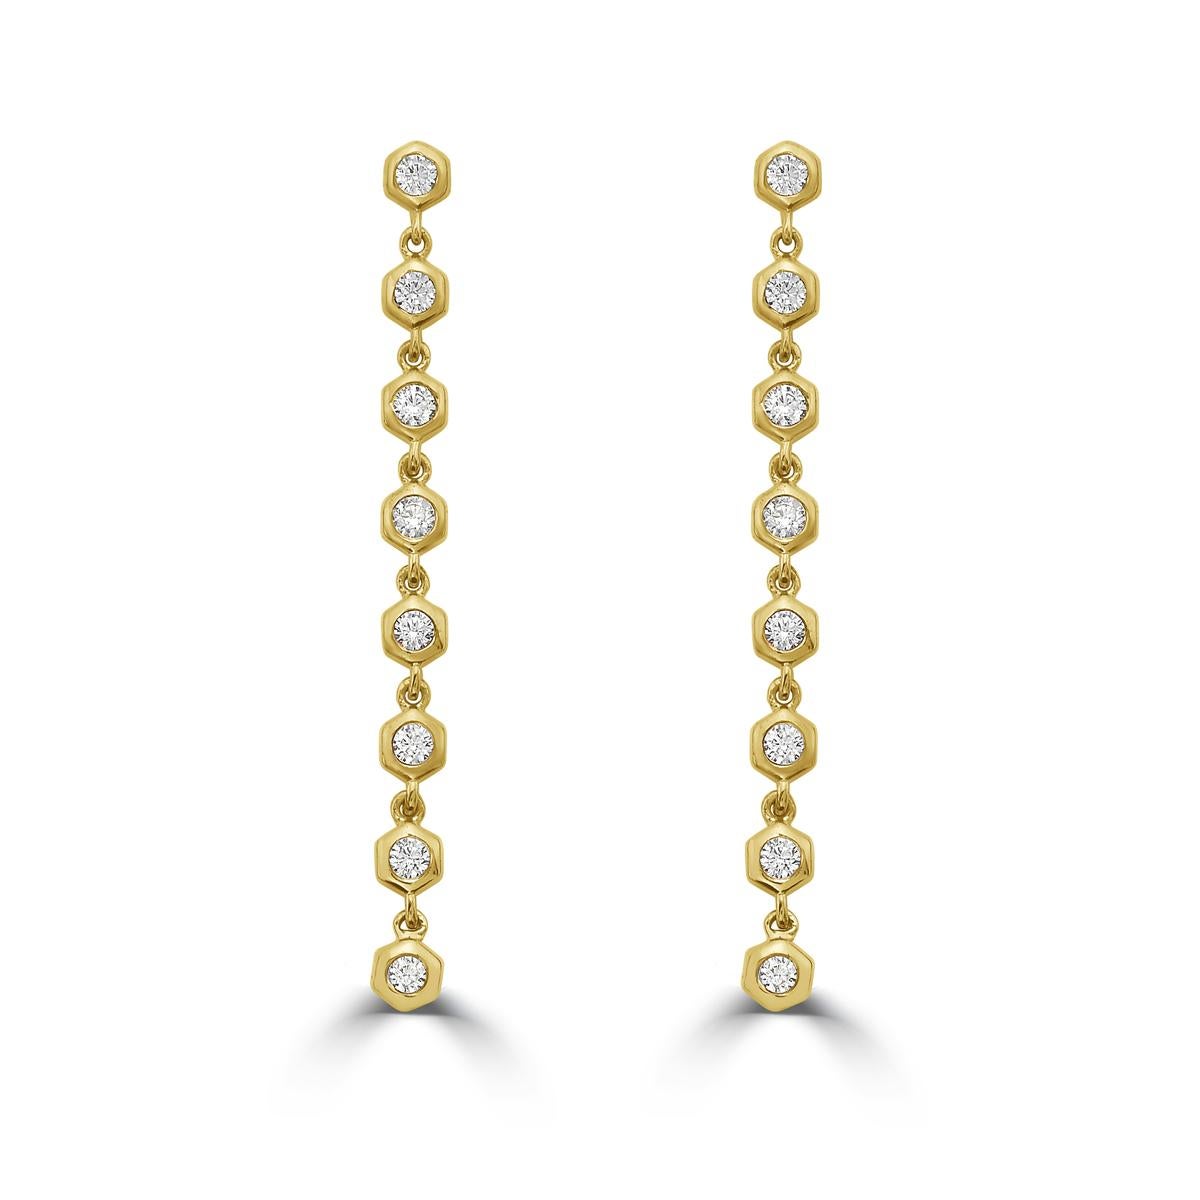 Discover the new classic in everyday fine jewelry. An updated twist to a classic piece, the Honeycomb Diamond Dangling Earrings is perfect for every day wear. Elevate your essentials and add elegance to your style with this design remix of a fine